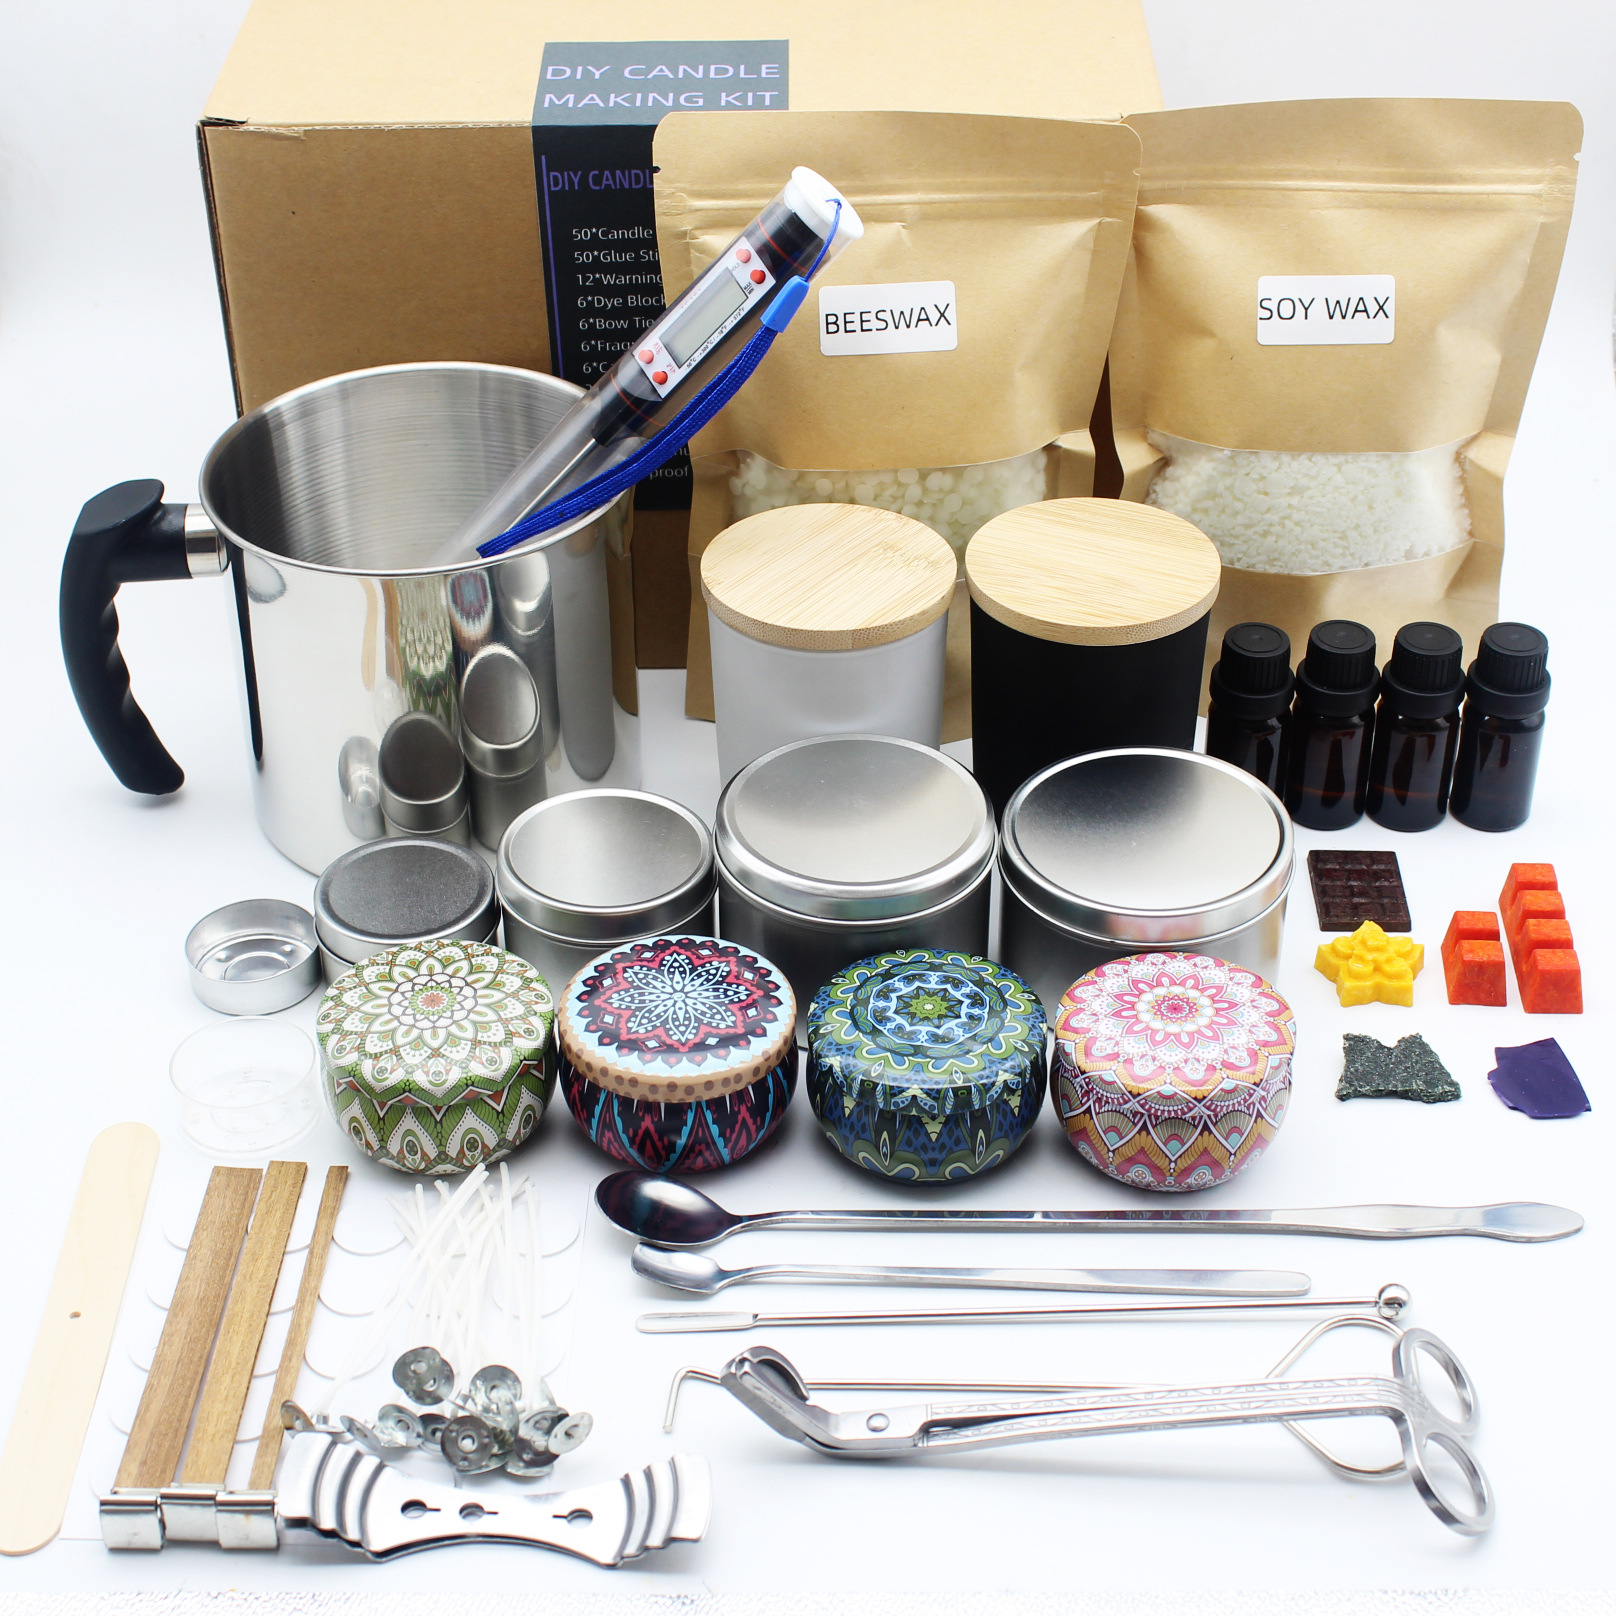 Candle diy set tool material wax core dy...